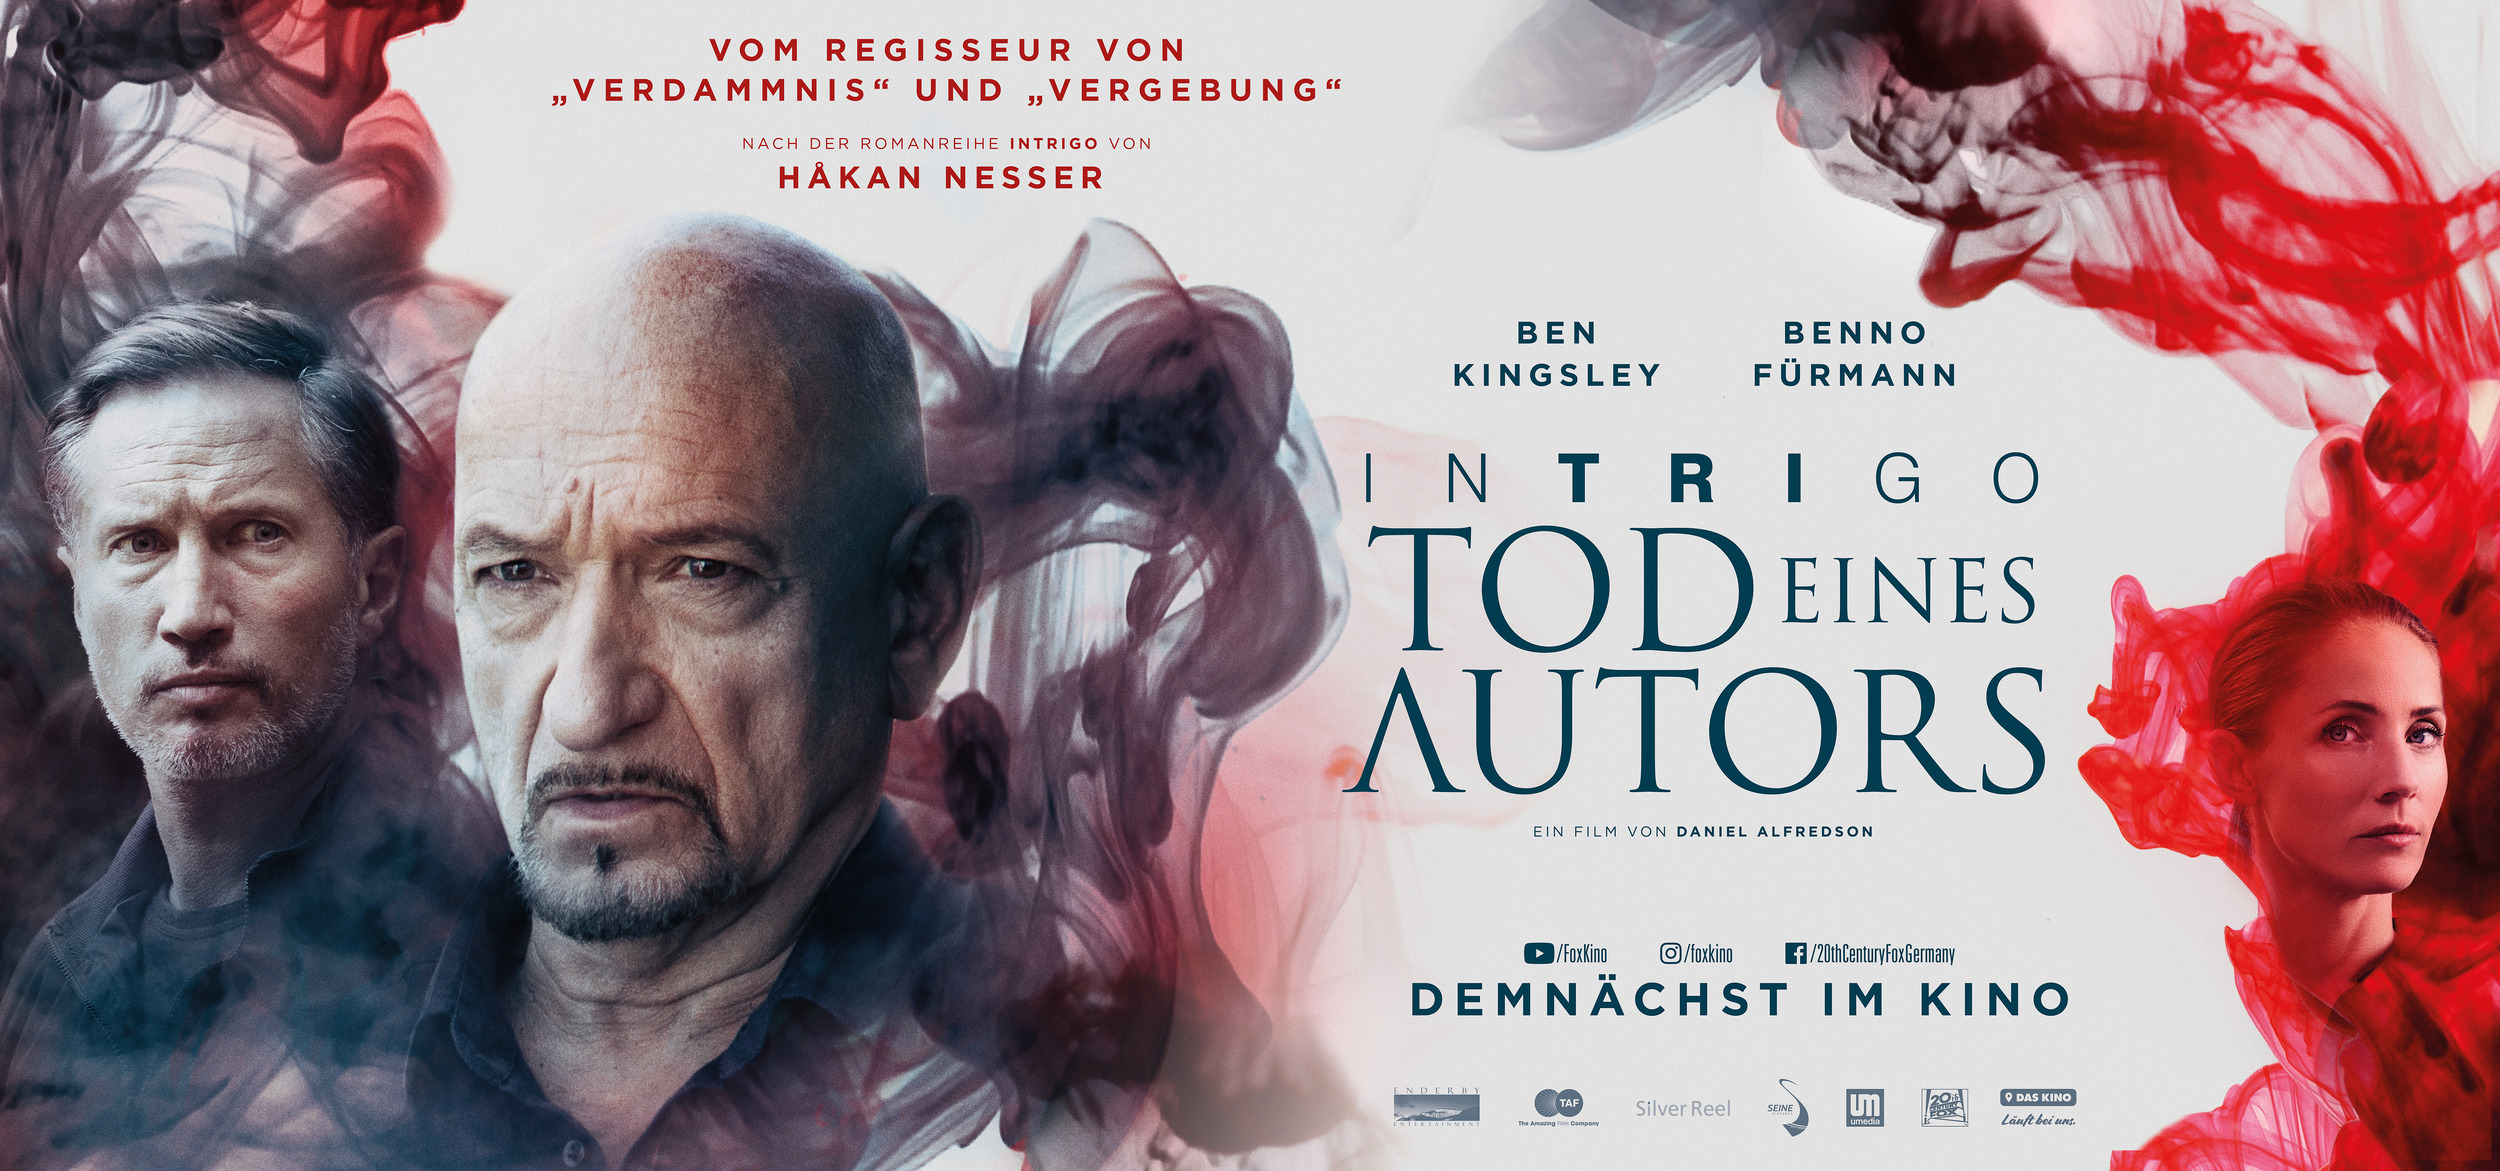 Mega Sized Movie Poster Image for Intrigo: Death of an Author (#3 of 4)